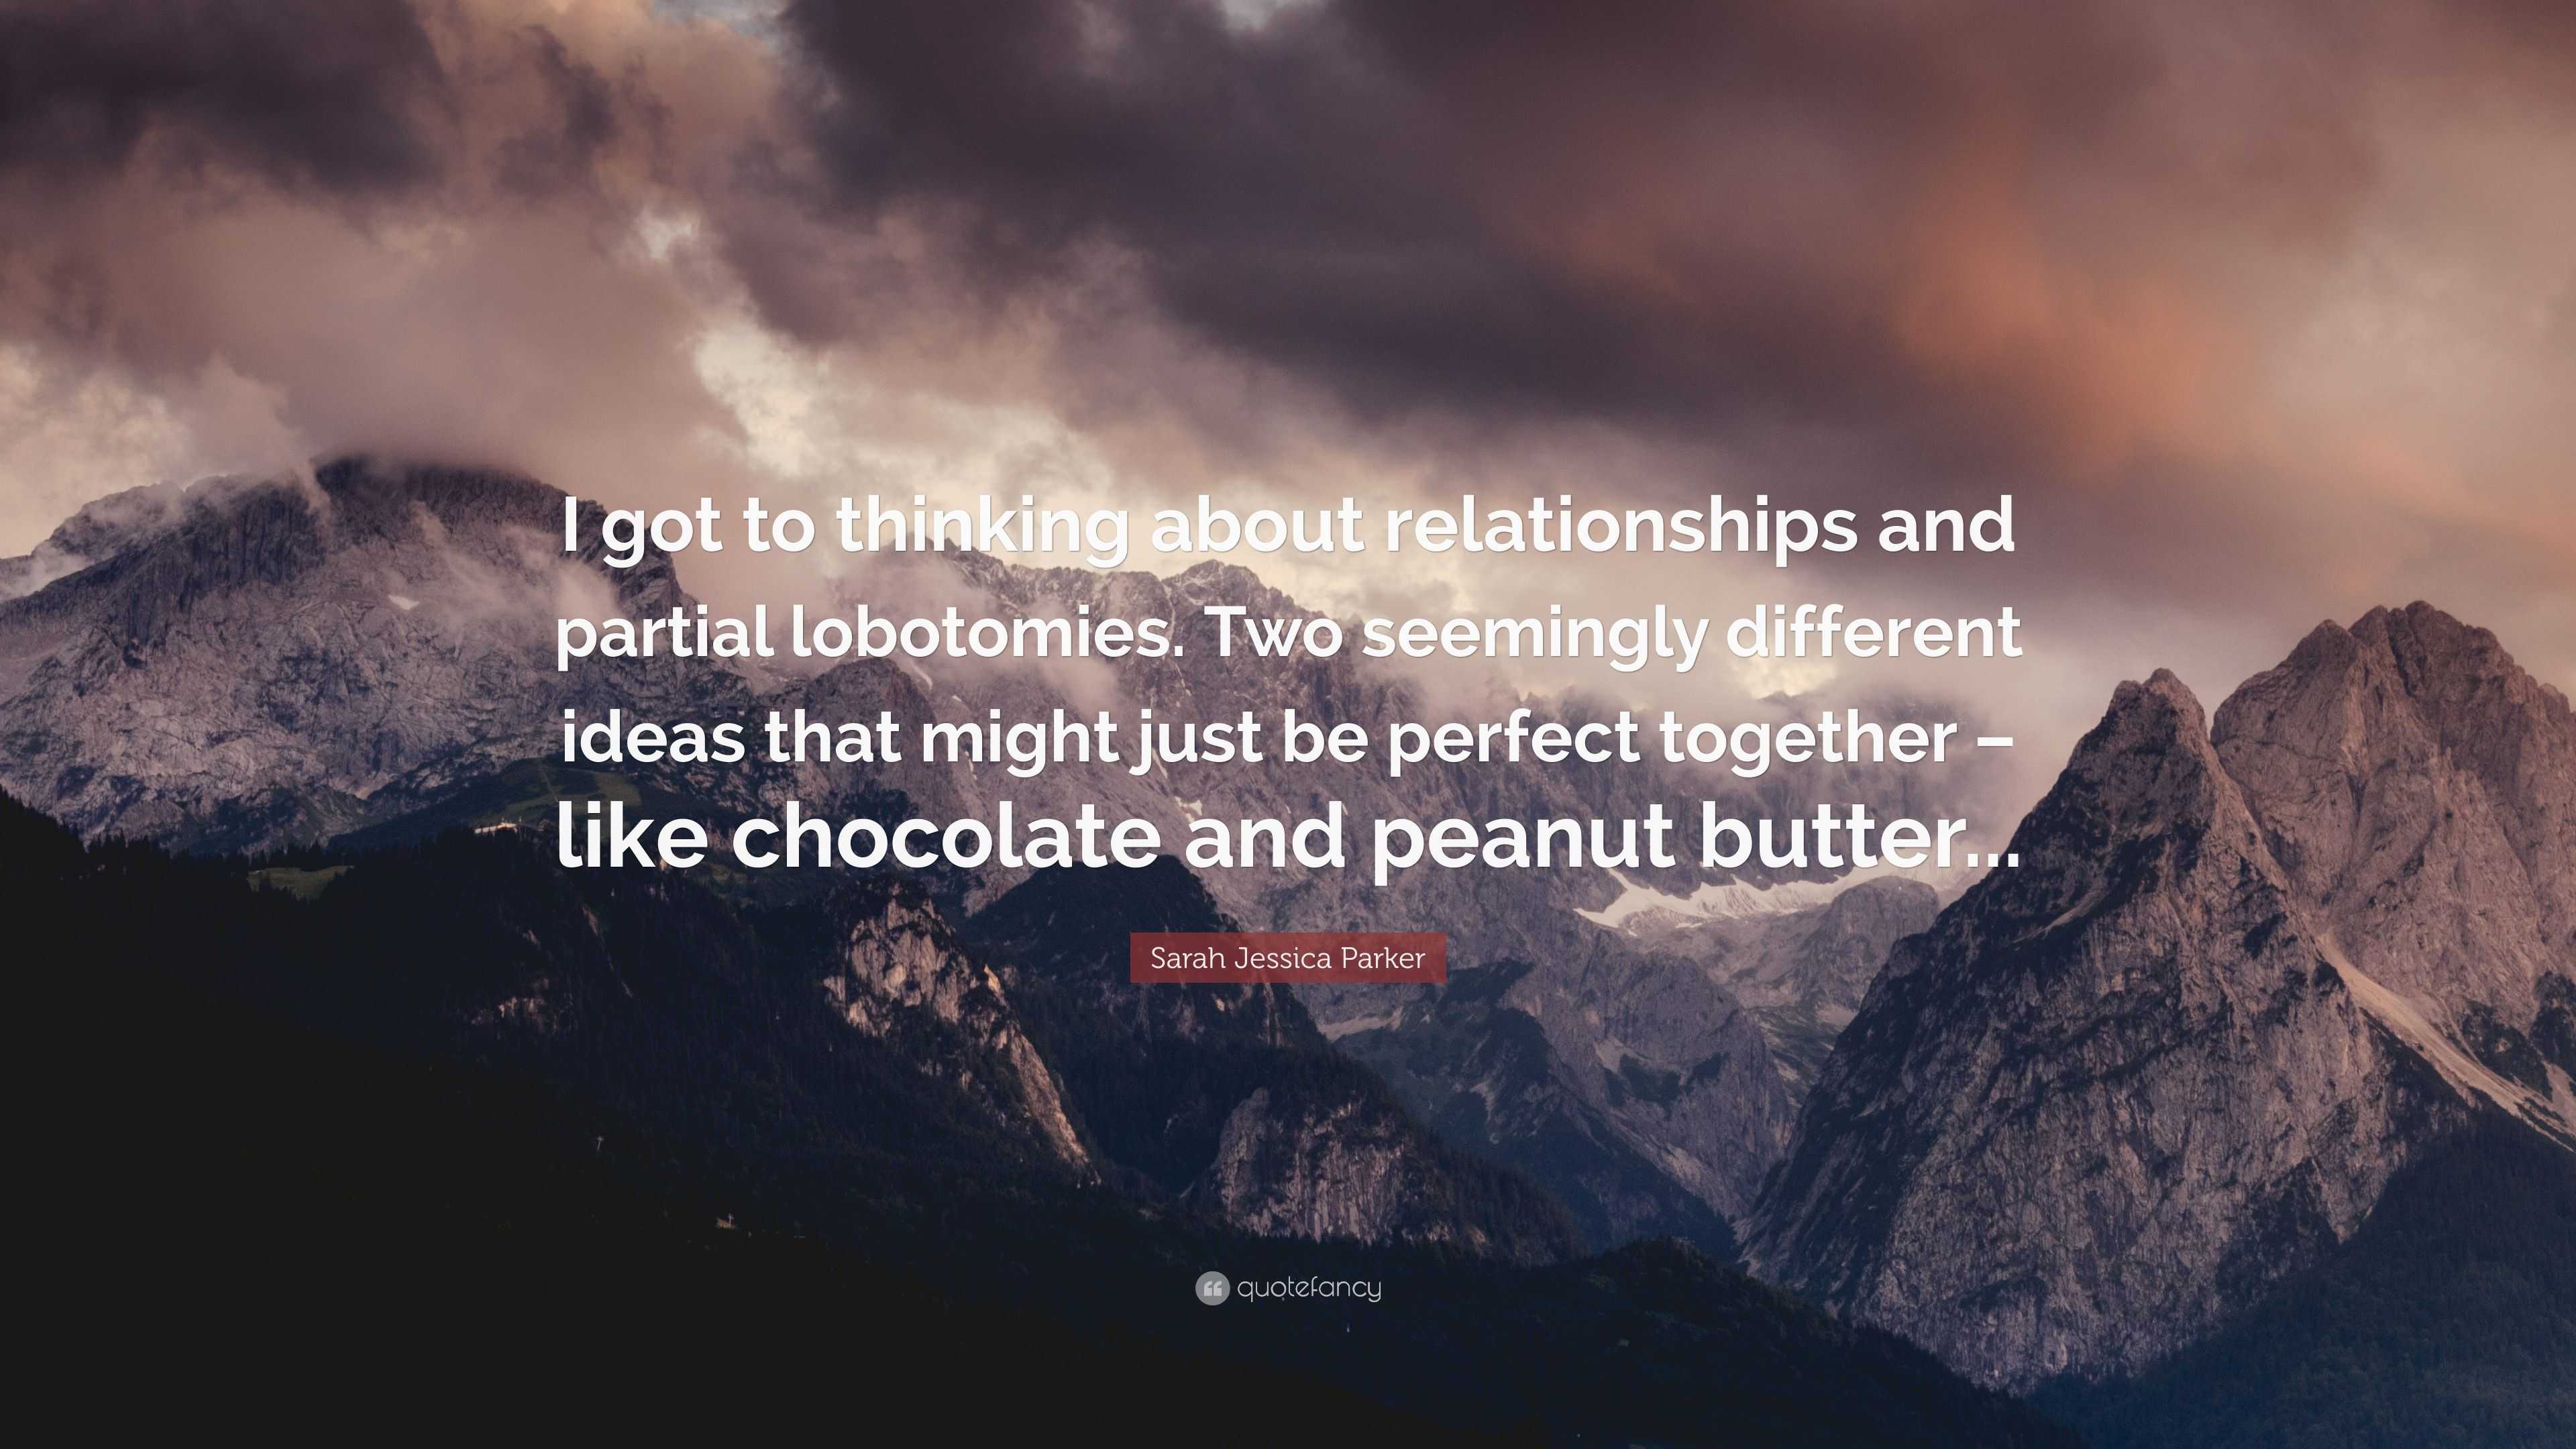 Sarah Jessica Parker Quote: “I got to thinking about relationships